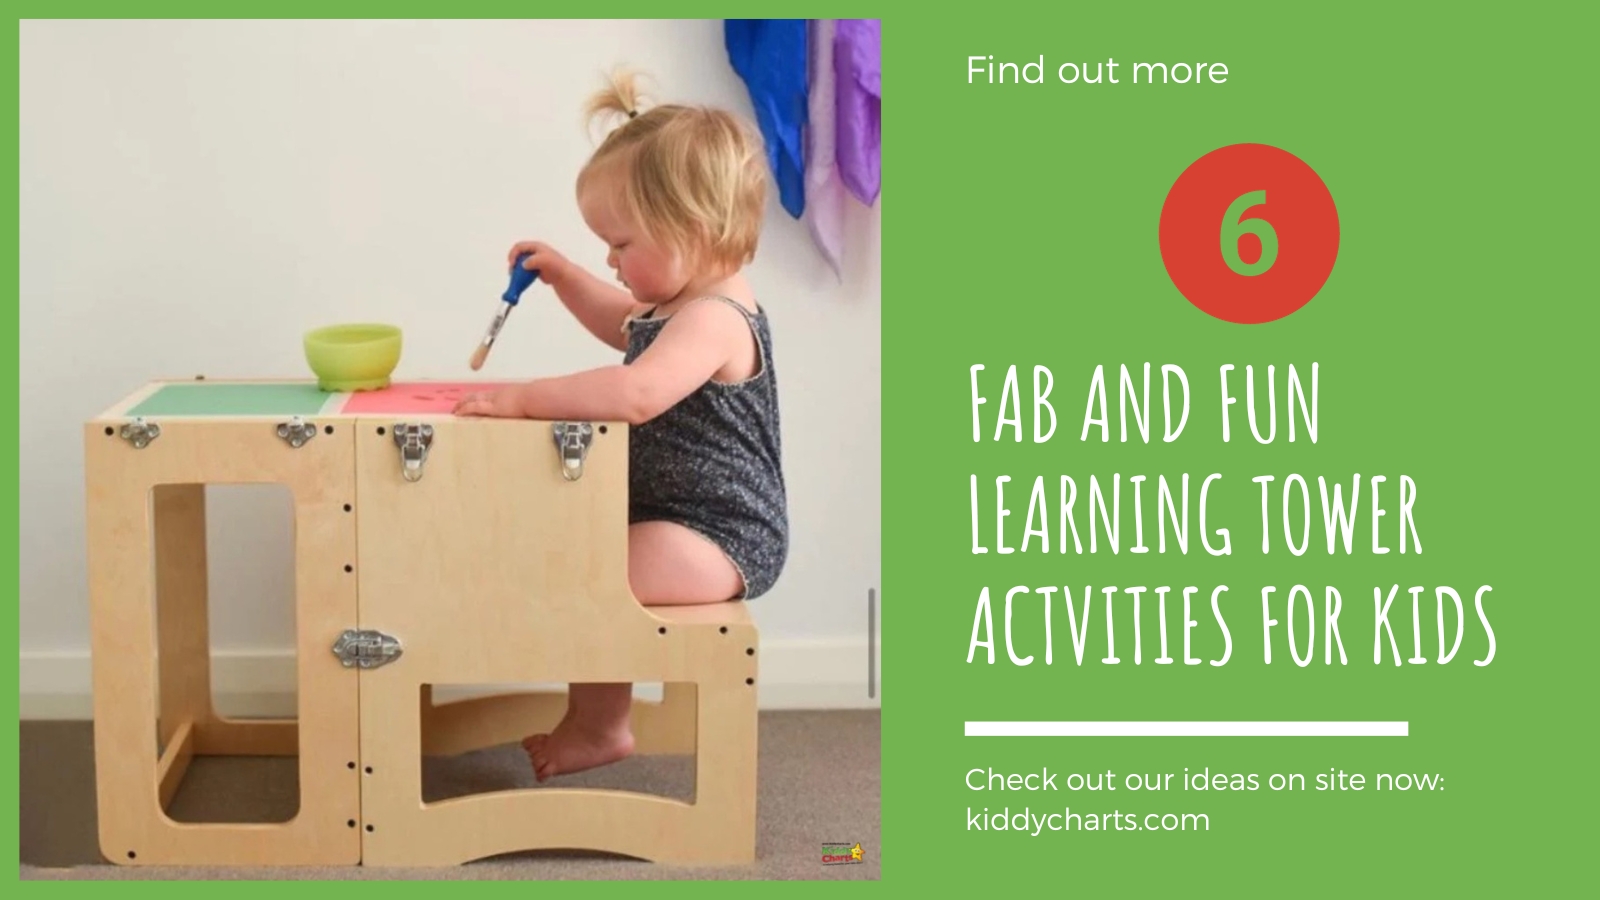 Making playtime educational: Fun activities with learning towers